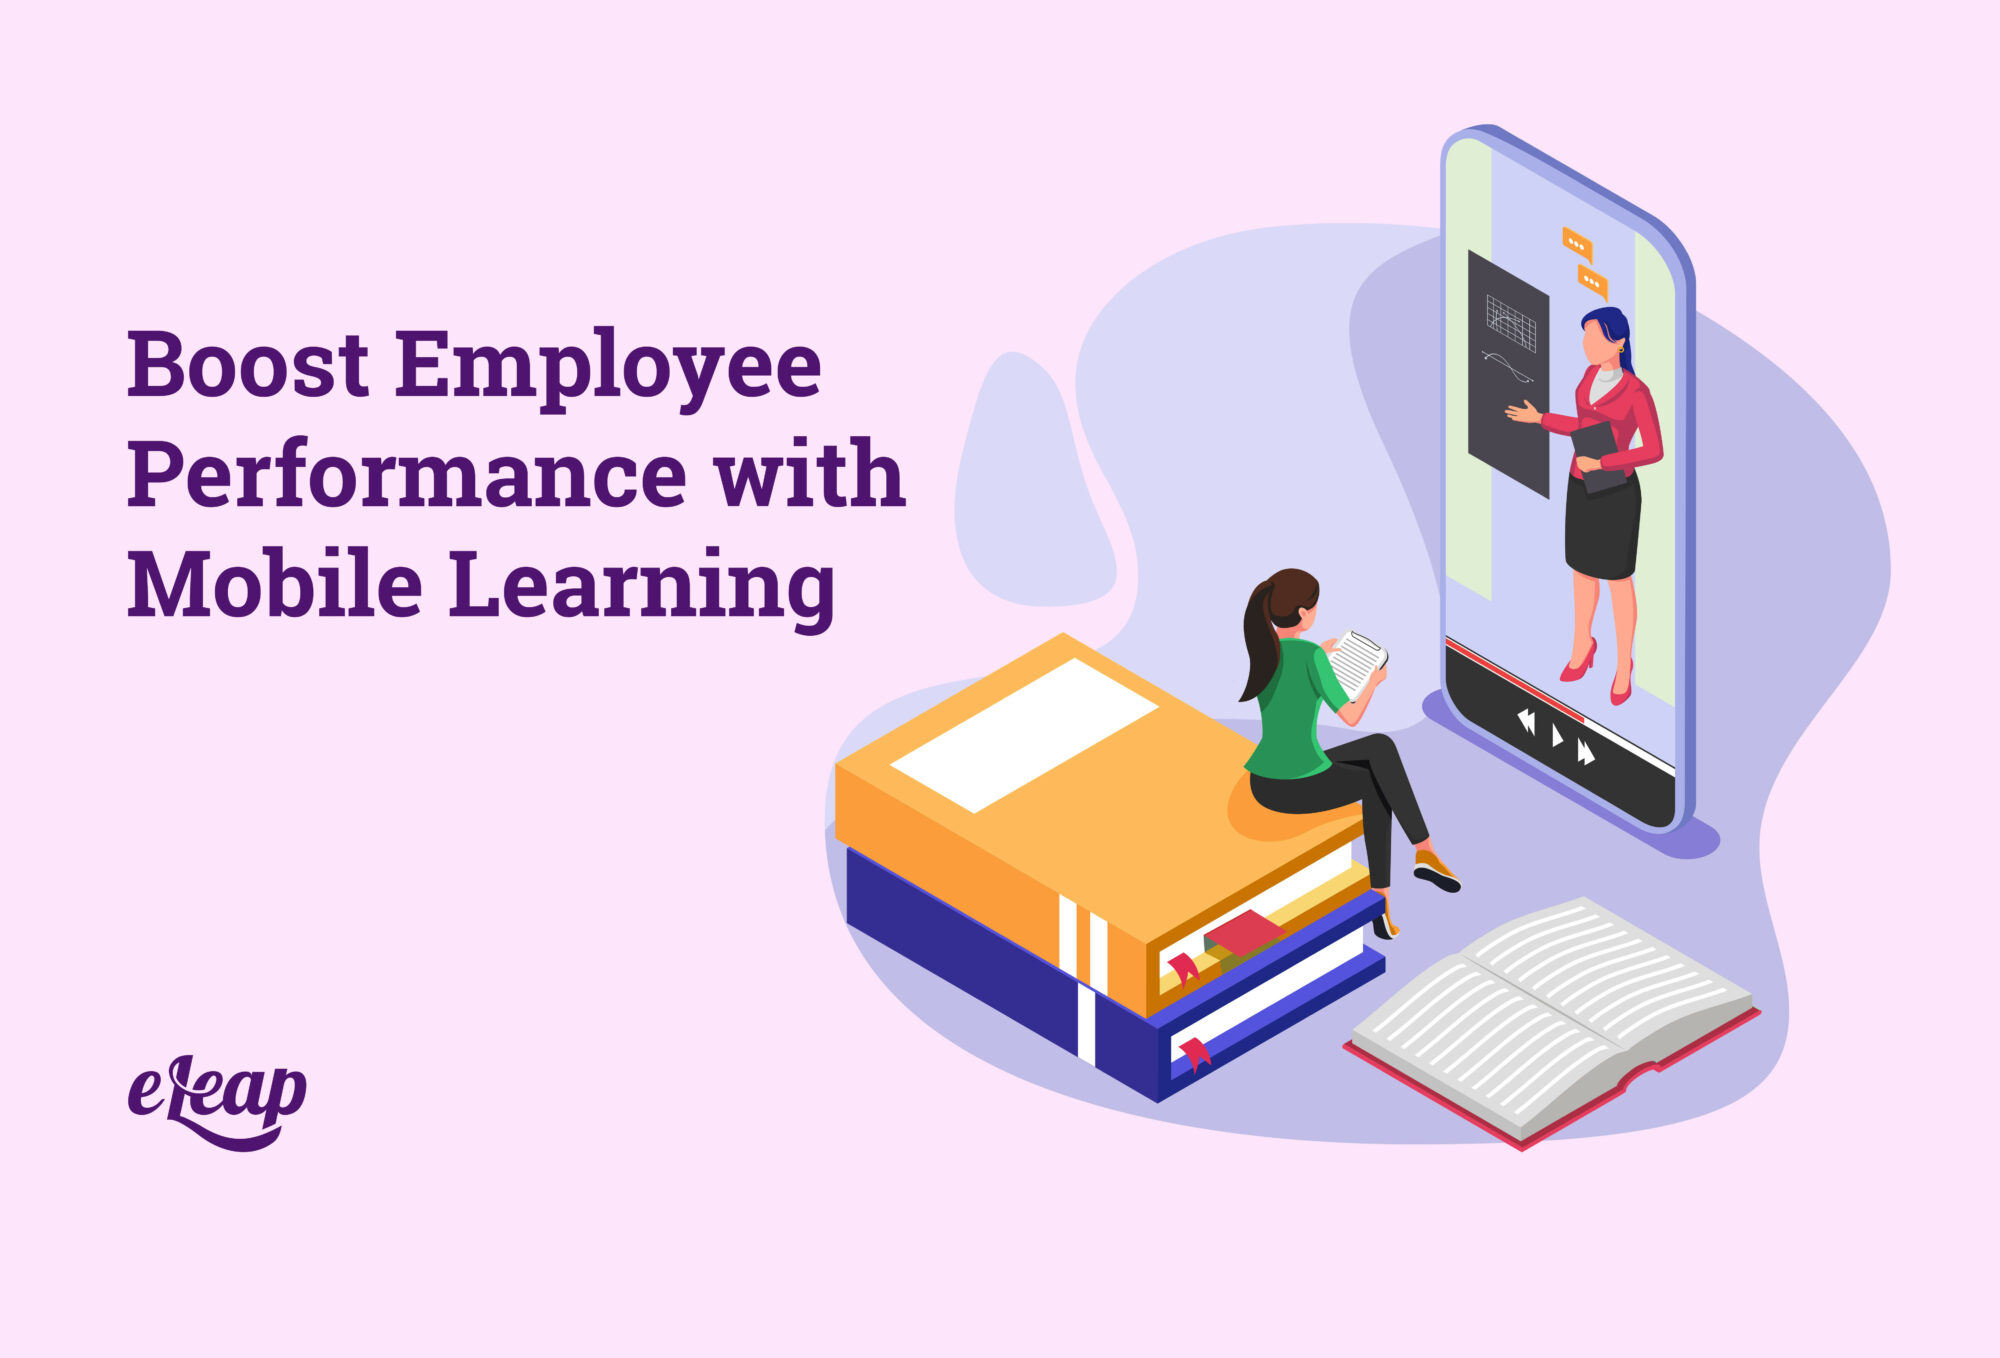 Boost Employee Performance with Mobile Learning